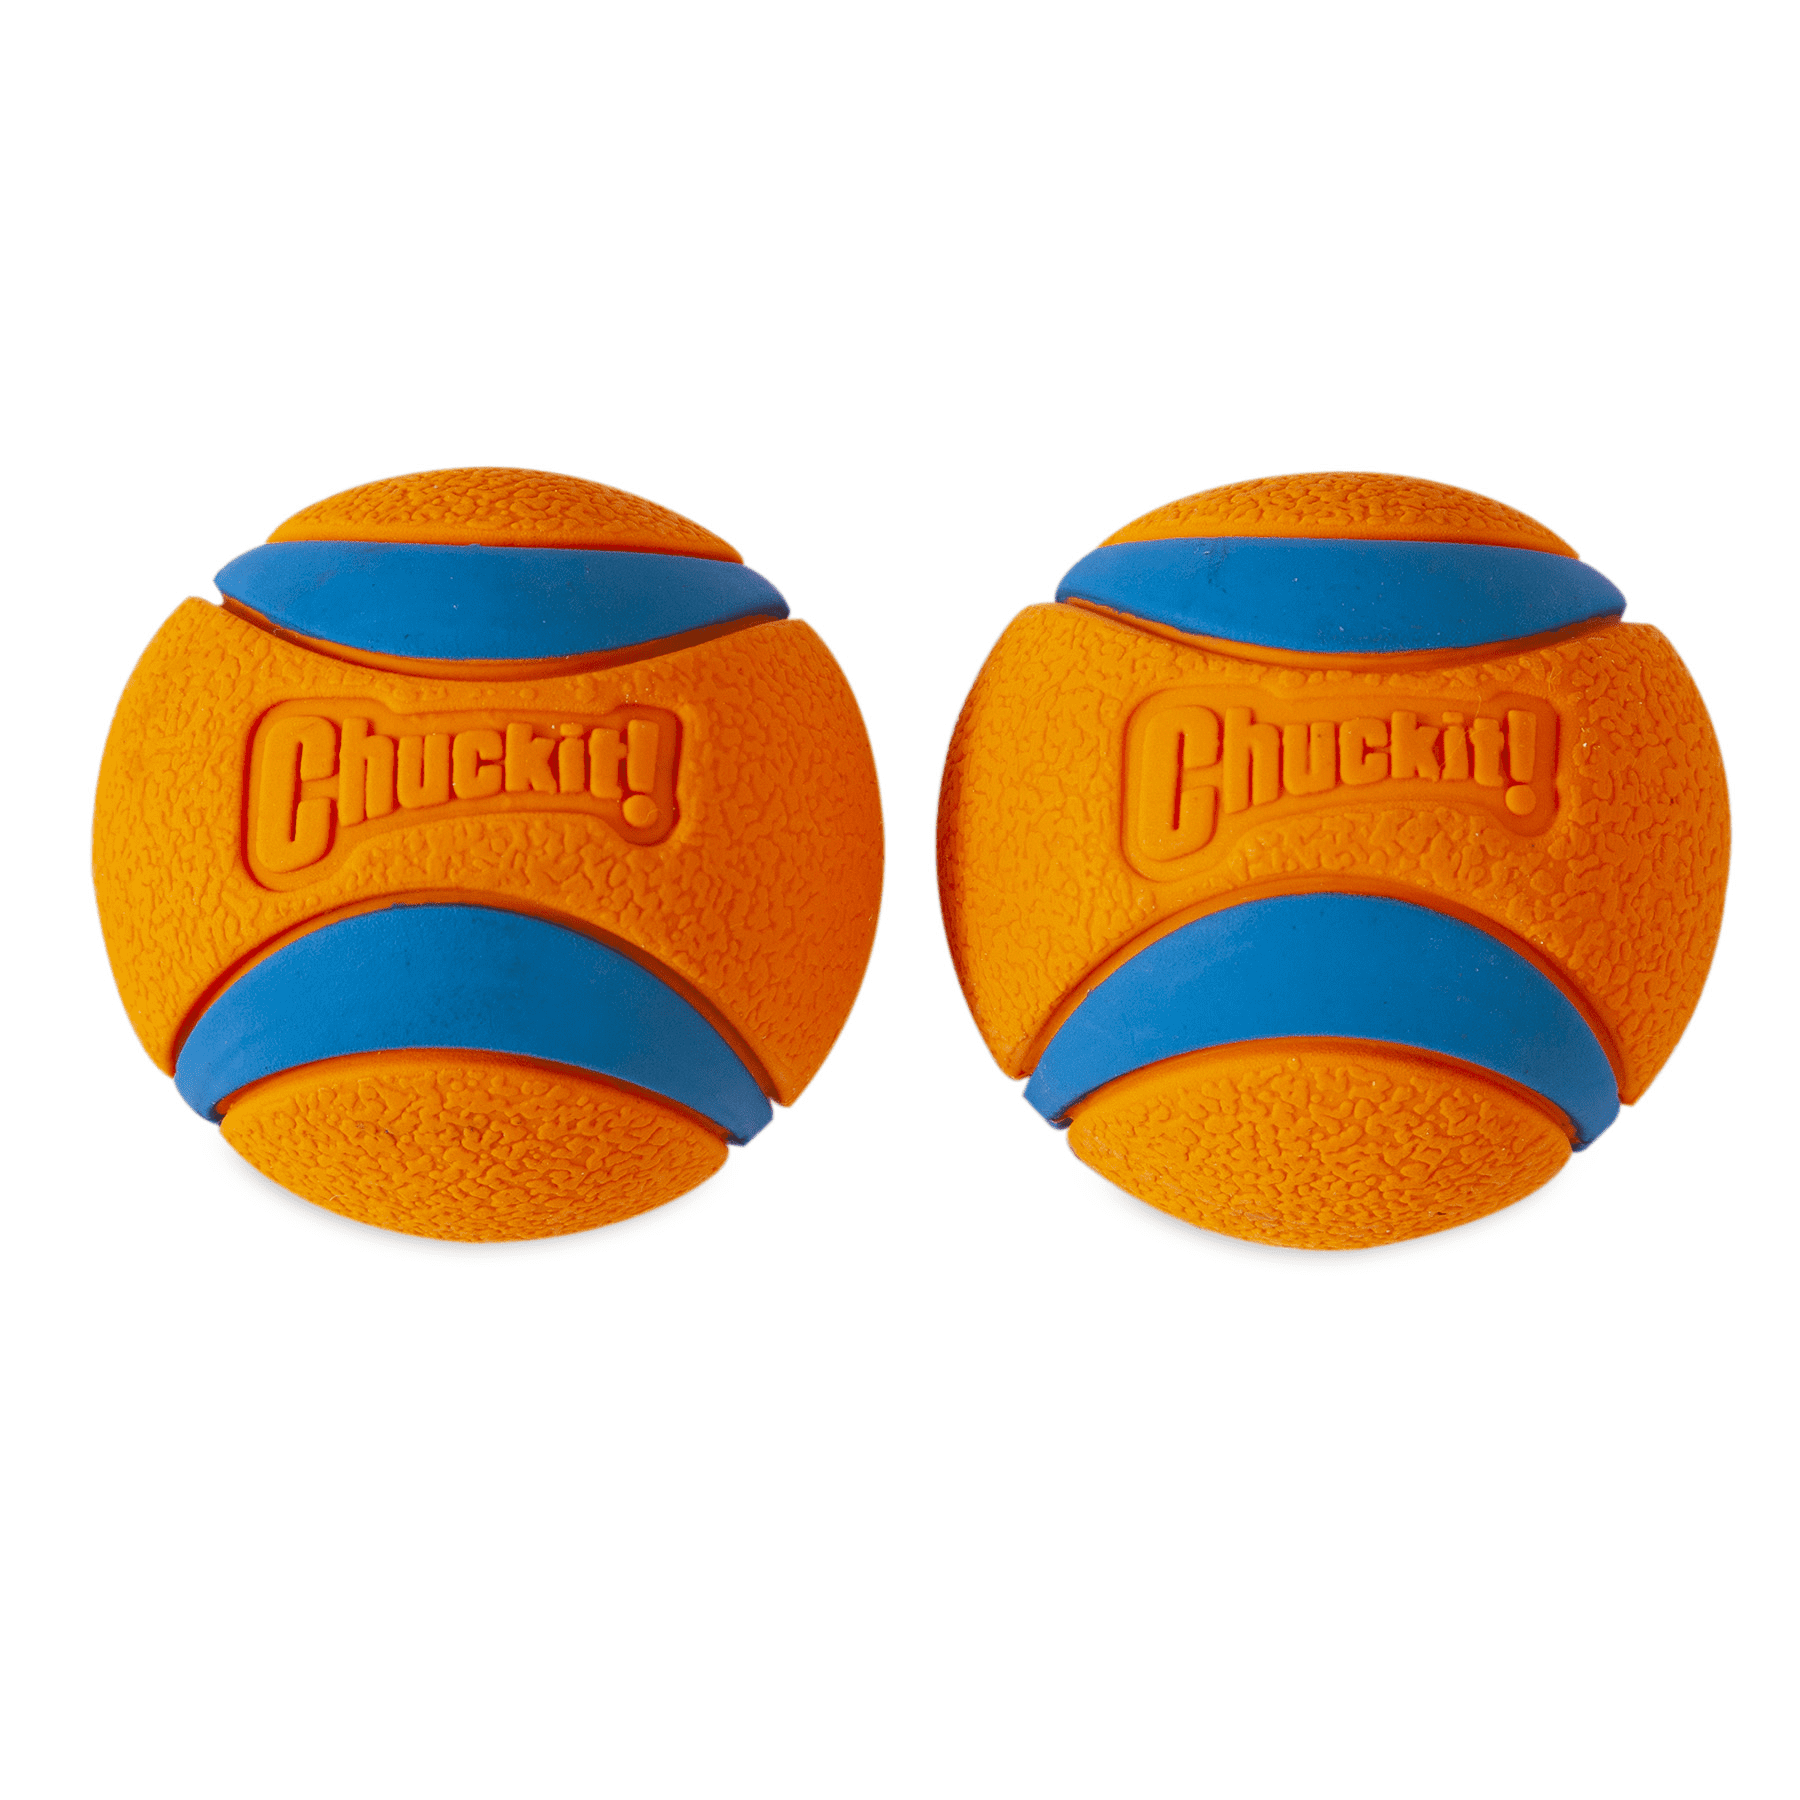 2 JUMBO TENNIS BALL 8.5" ASSORTED COLOR Dog Or Cat Play Chew Toy Free Shipping 